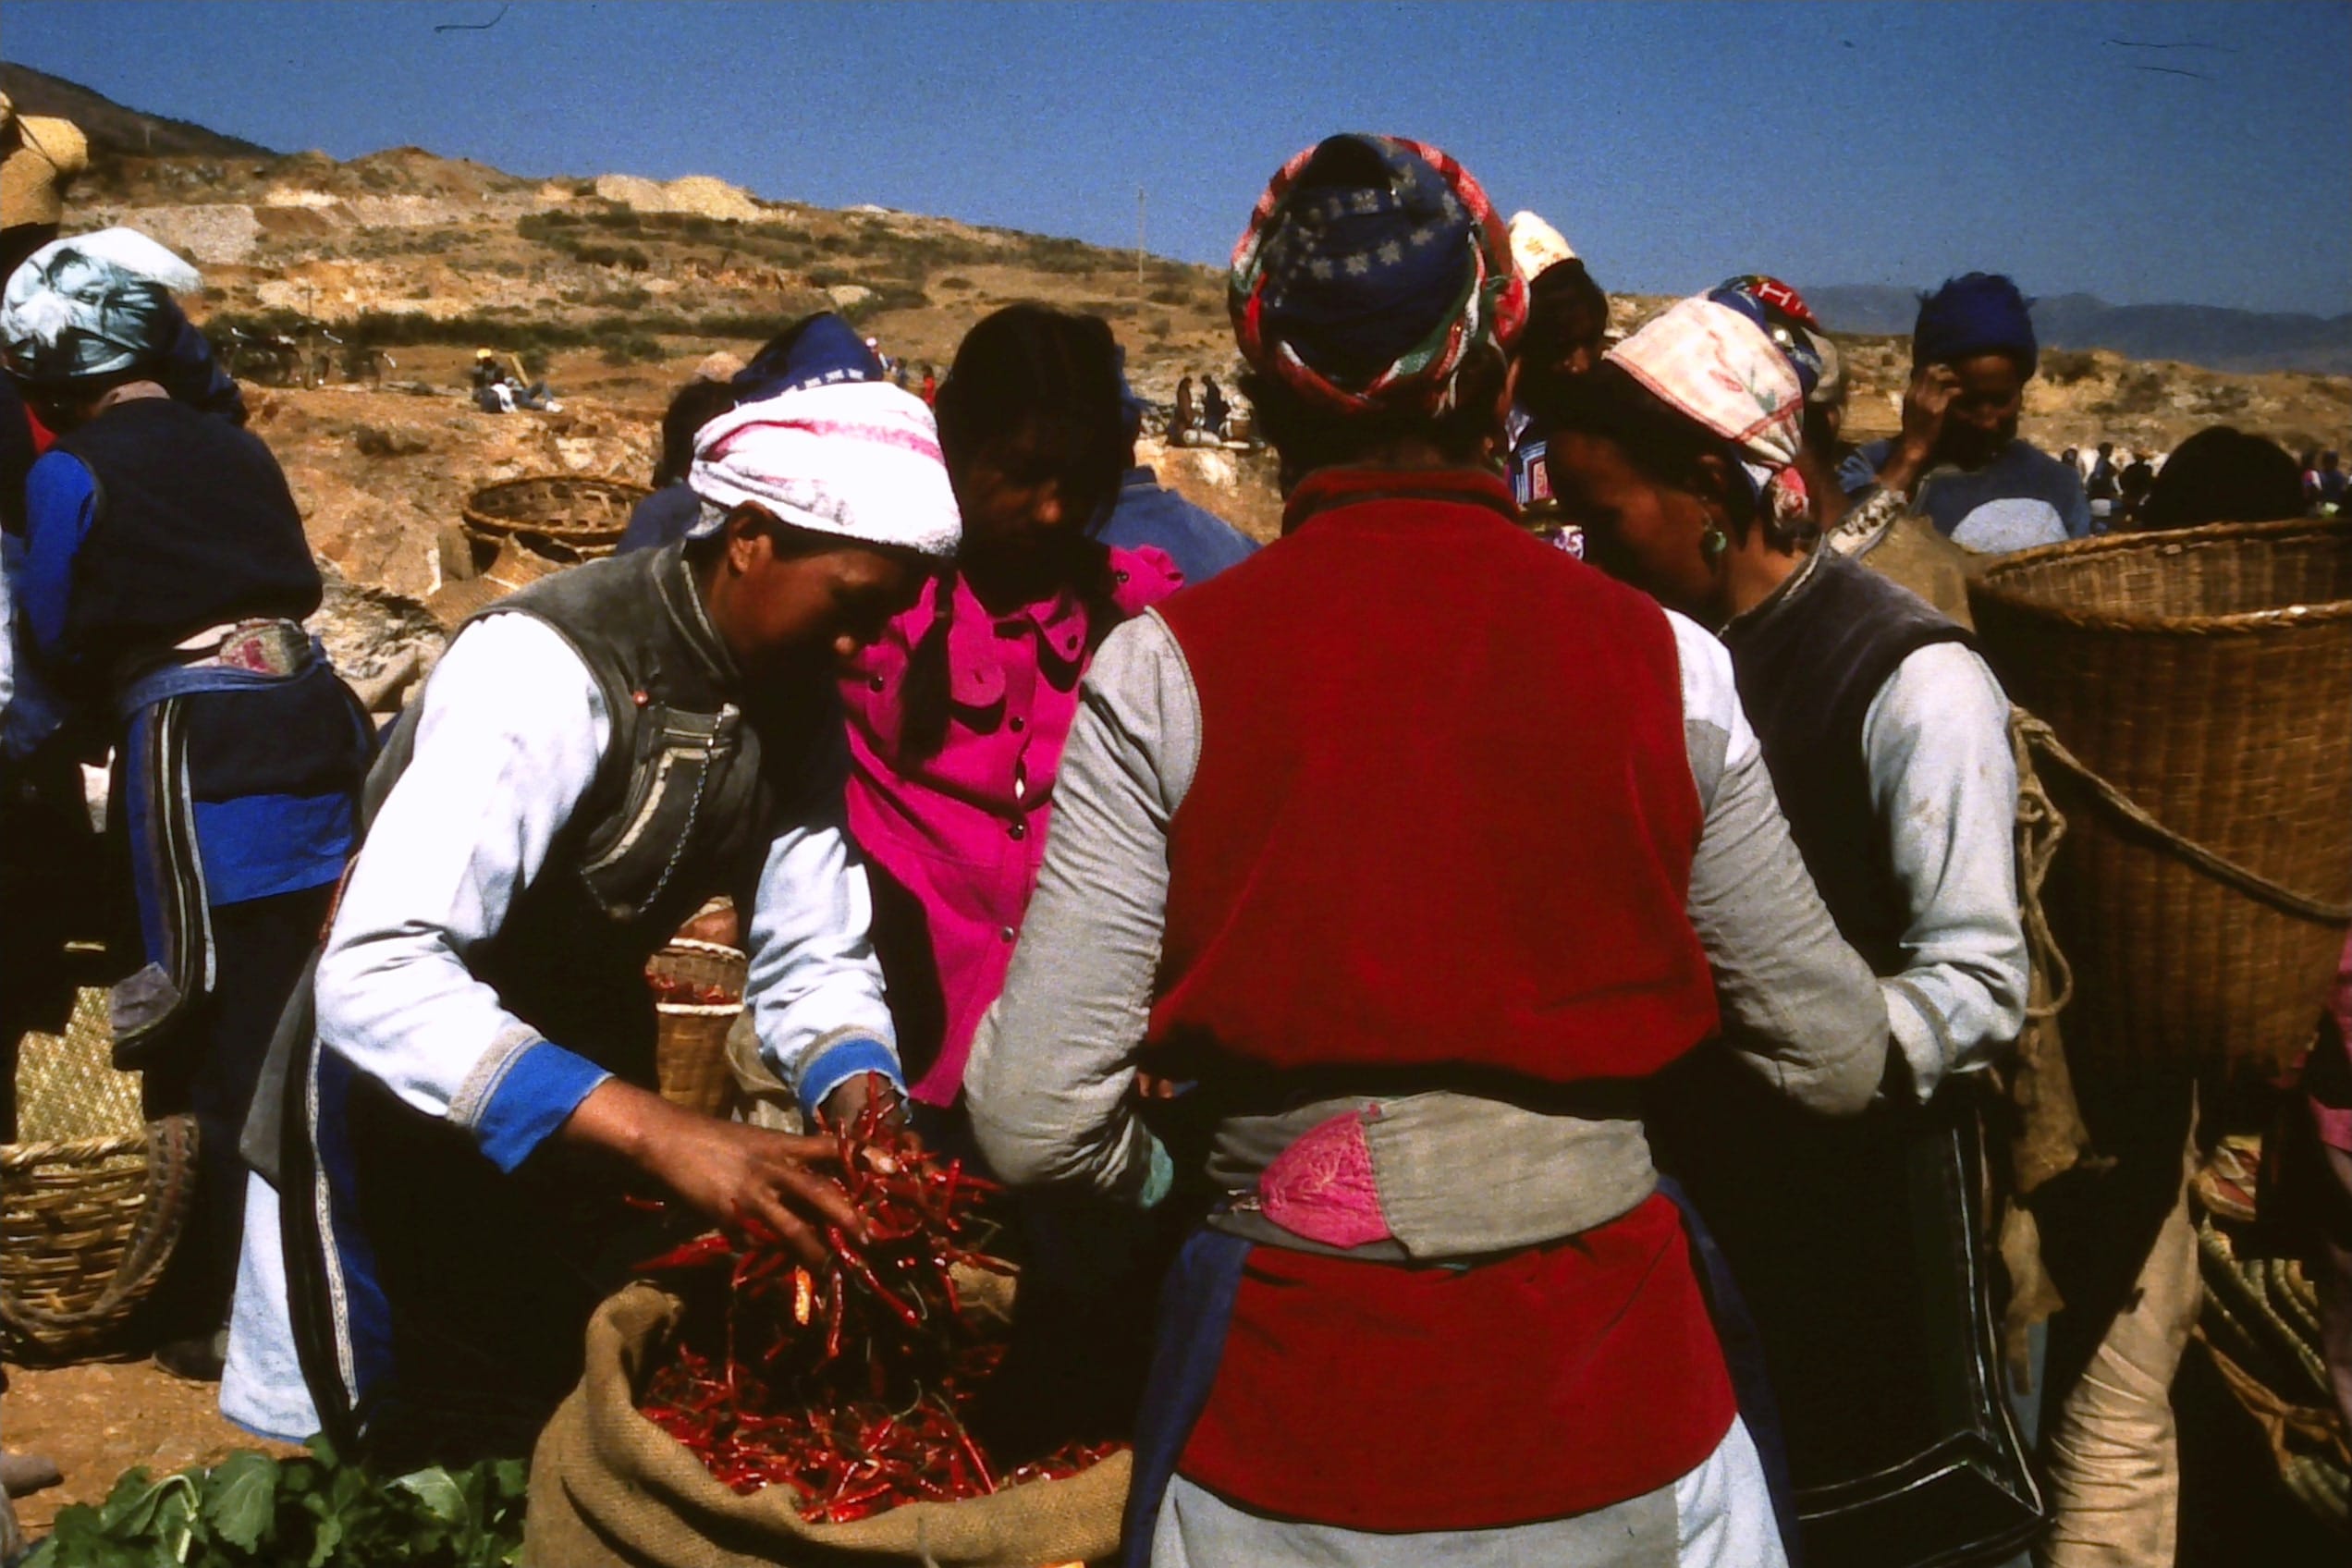 Open market in the mountains outside Dali. Women sampling red Chillies.